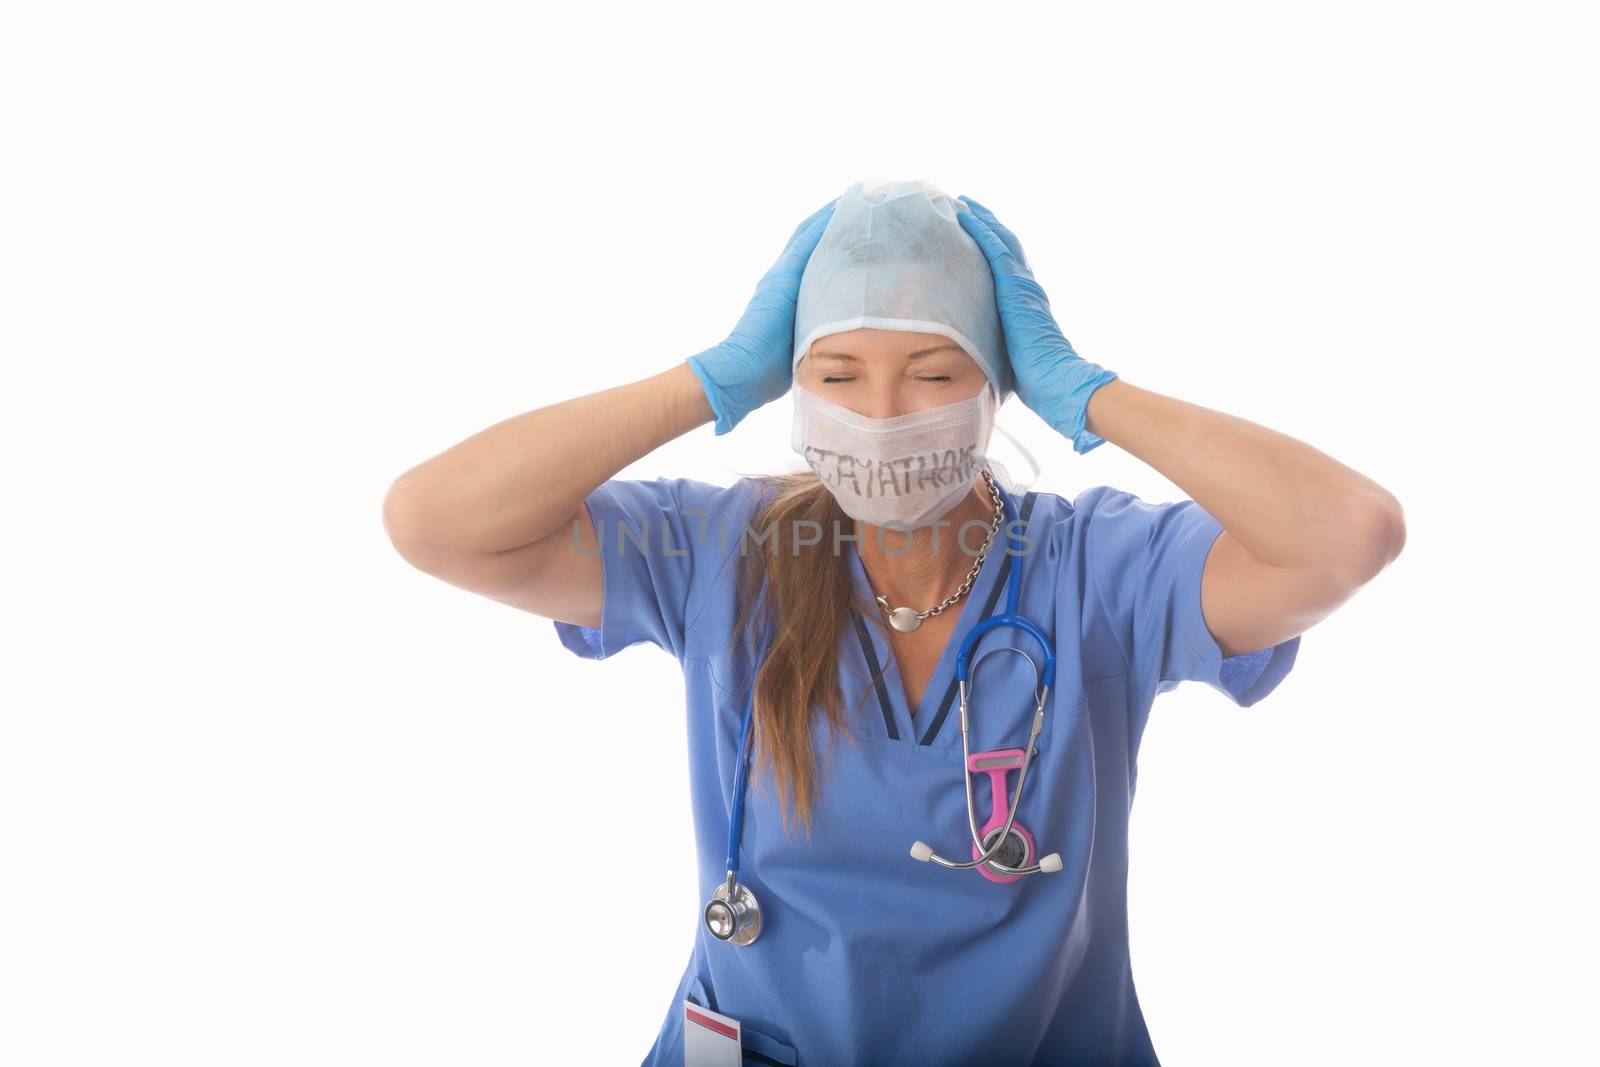 Frustrated or overworked hospital nurse by lovleah